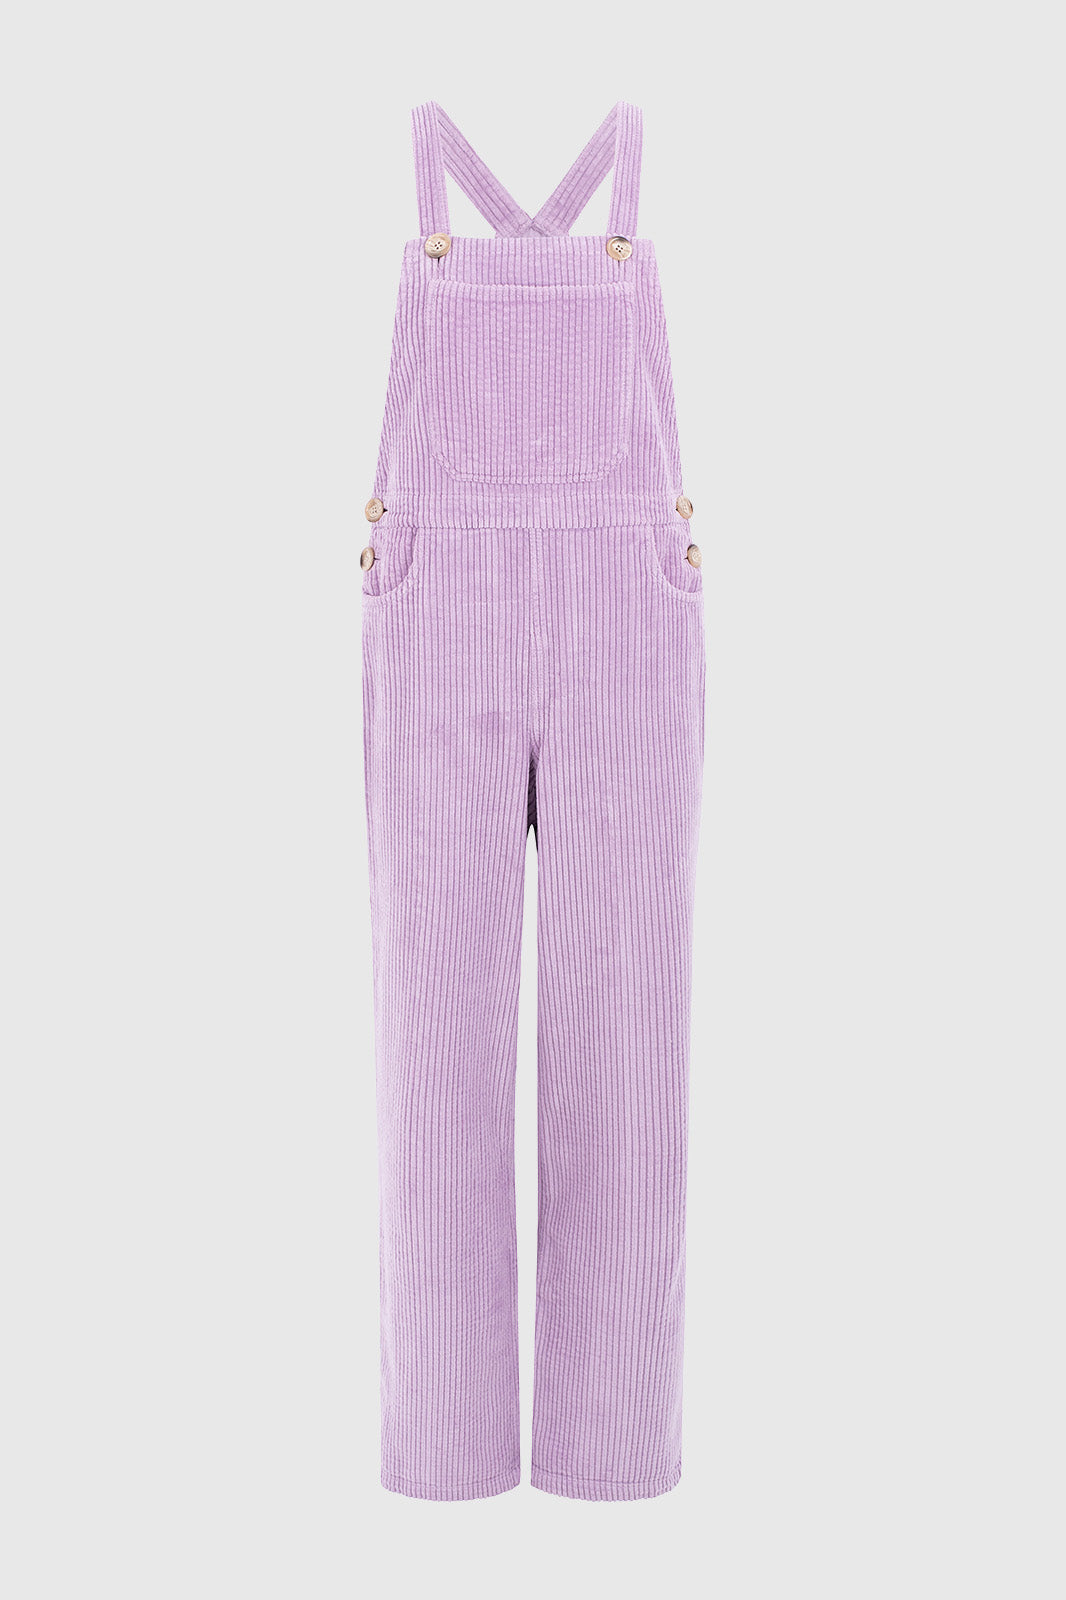 Naz women's corduroy cotton overalls in lilac. Made in Portugal.